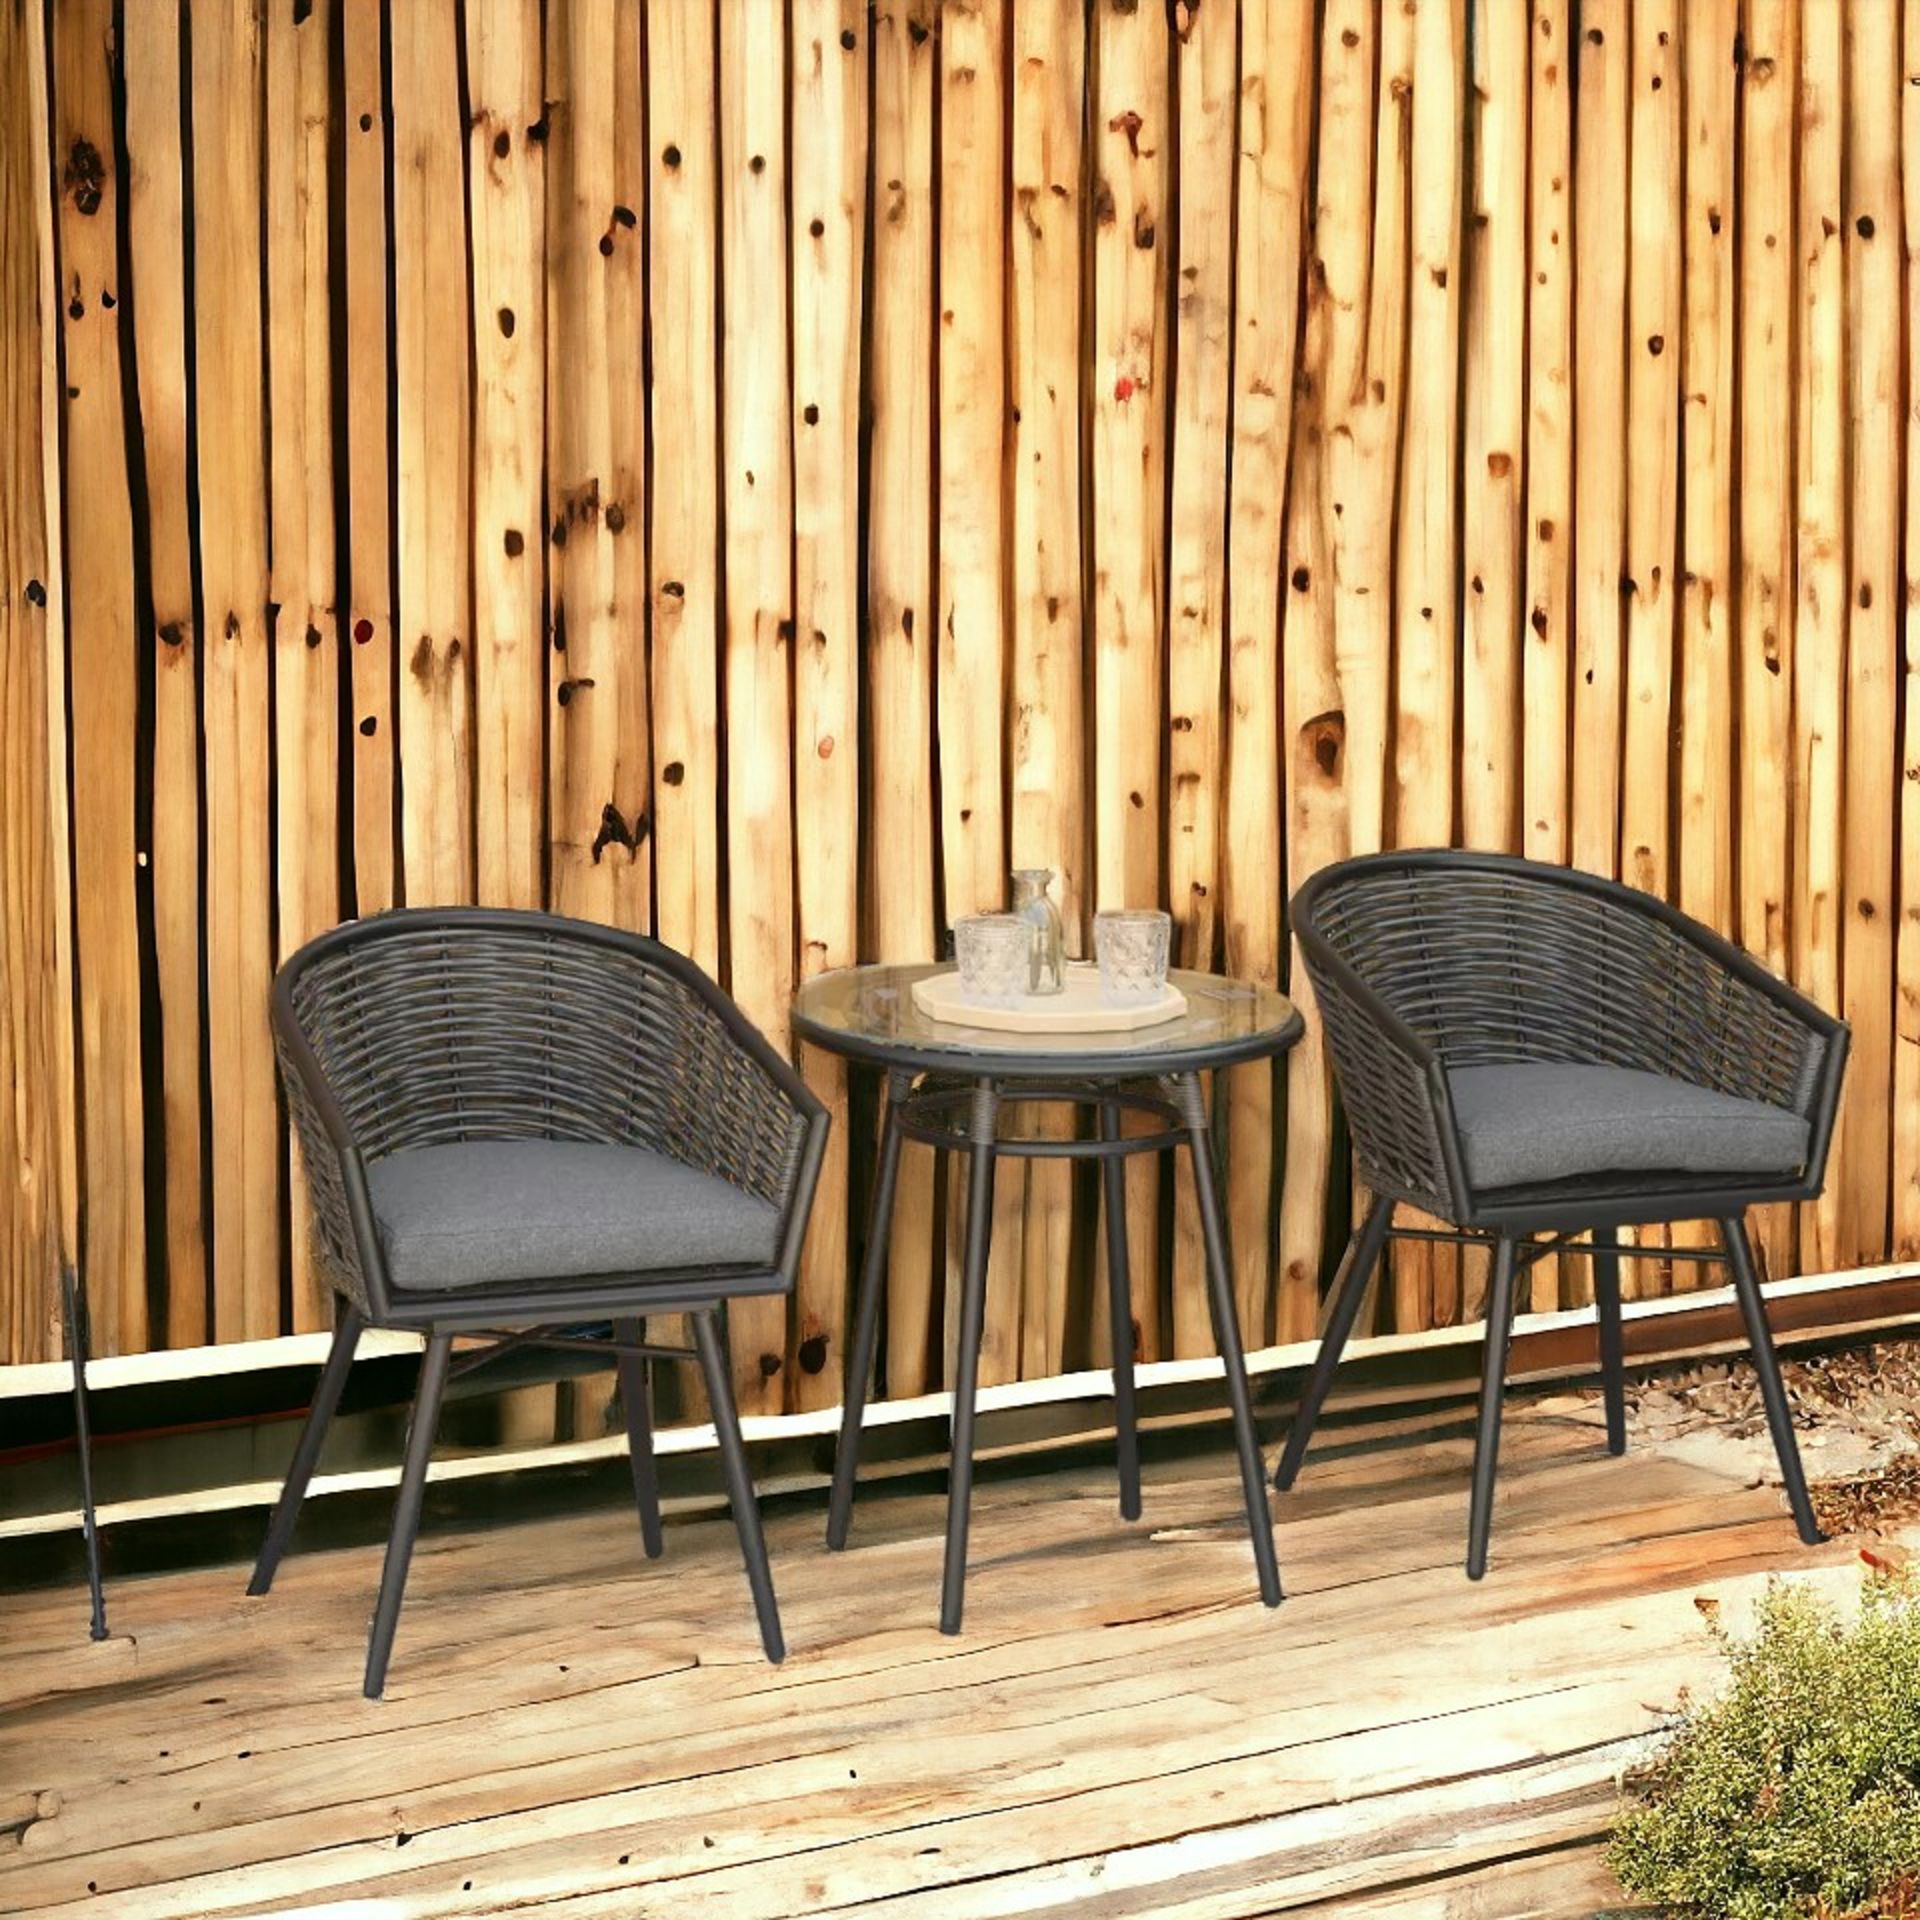 FREE DELIVERY - BRAND NEW 3 PCS PATIO RESIN WICKER HAND WOVEN BISTRO SET 2 CHAIRS 1 COFFEE TABLE - Image 2 of 2